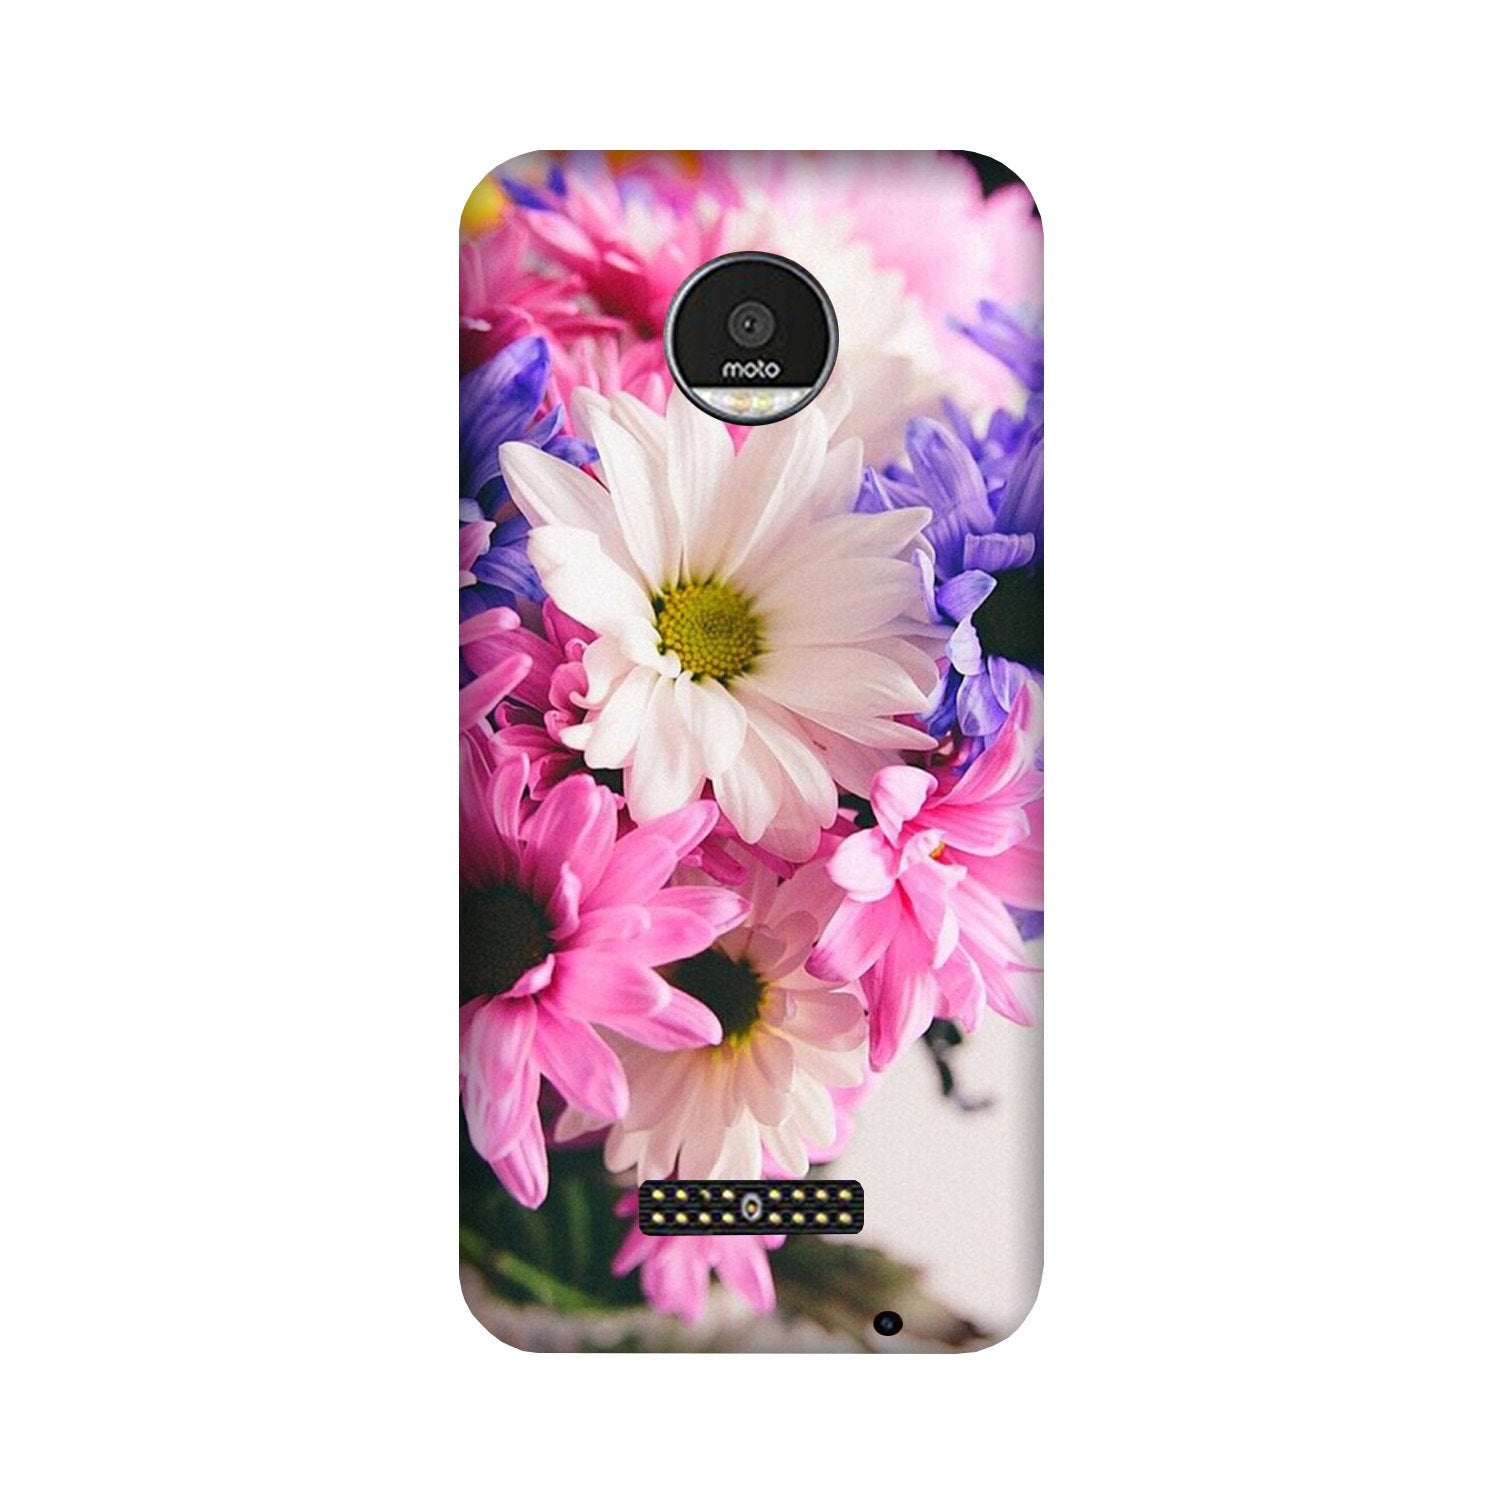 Coloful Daisy Case for Moto Z Play